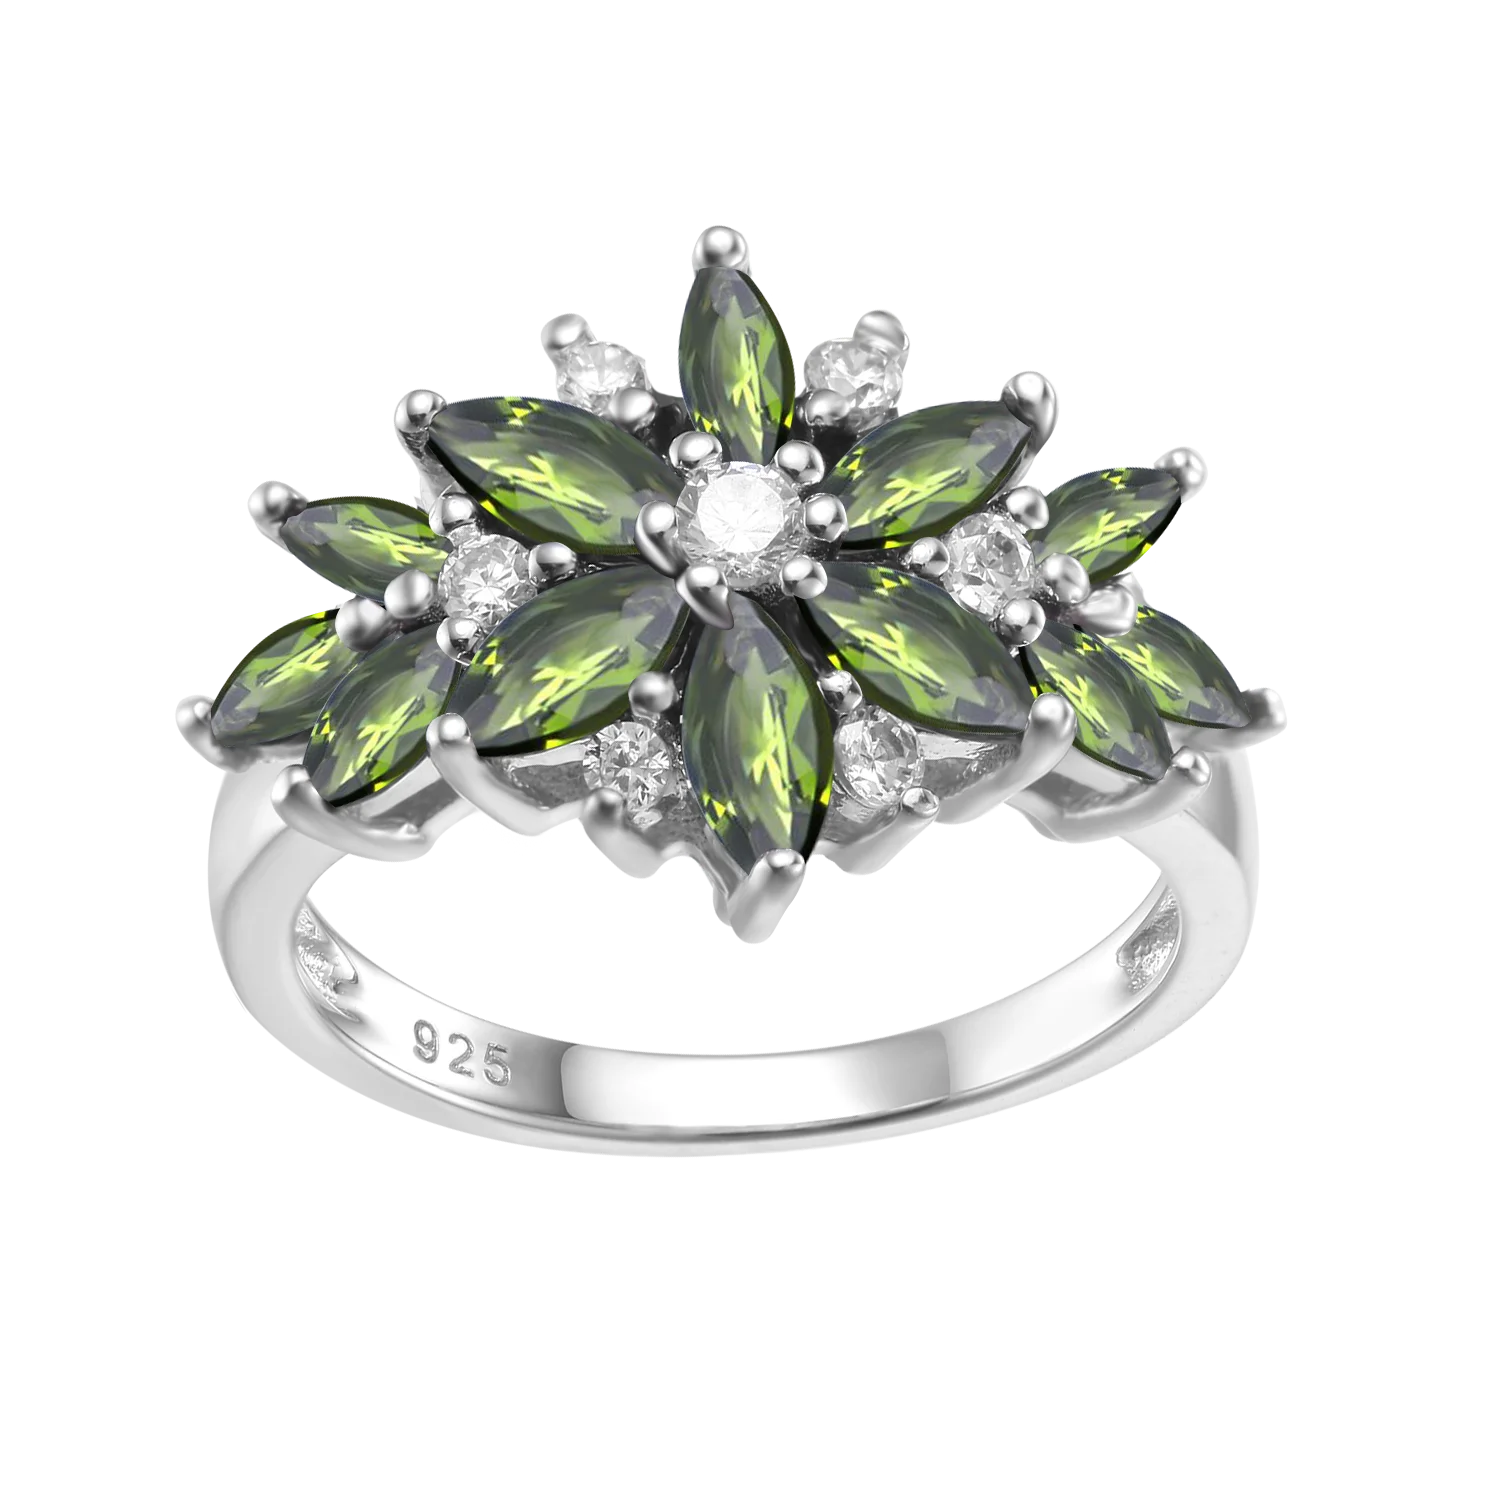 GEM'S BALLET Real 925 Sterling Silver Tourmaline Rings For Women Natural Gemstone Ring Romantic Gift Engagement Jewelry Chrome Diopside CHINA